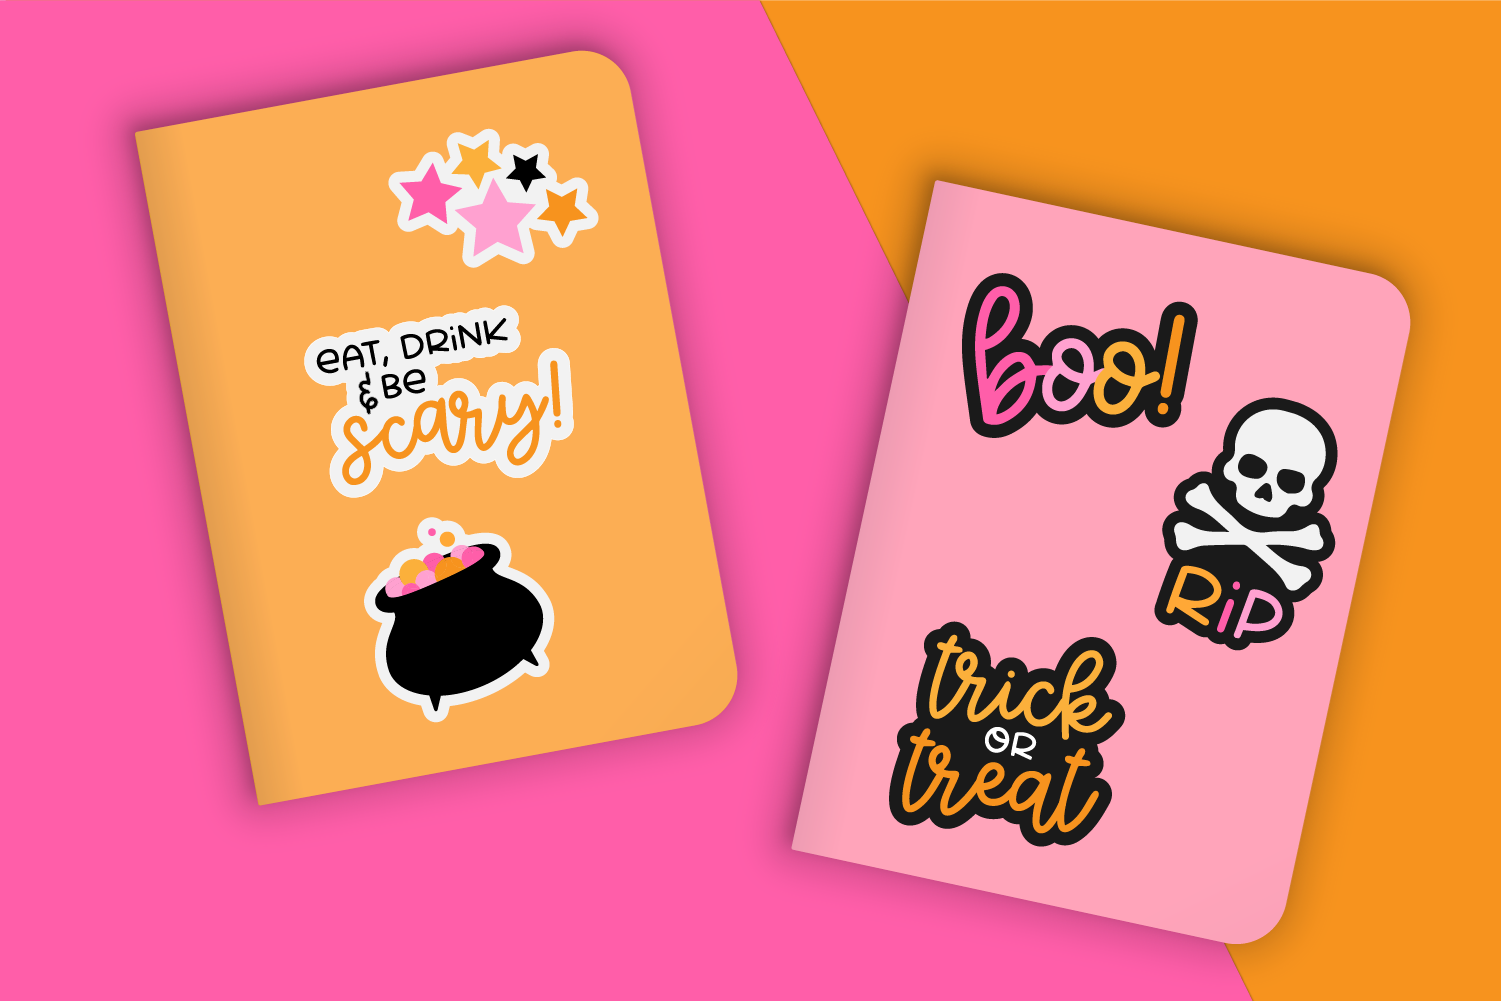 Halloween stickers on pink and orange notebooks.